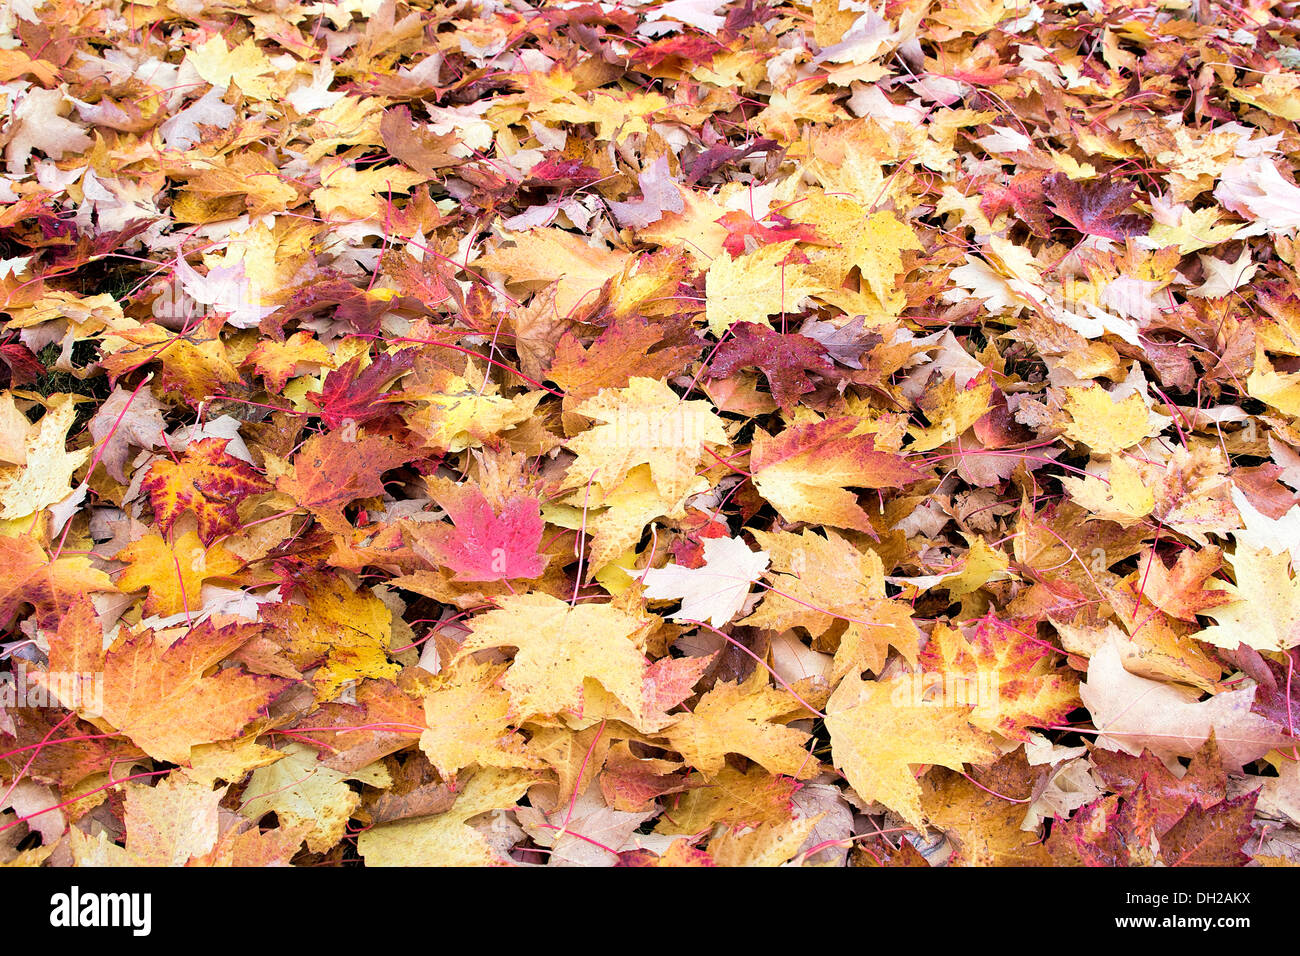 Fallen Maple Tree Leaves with Morning Dew Water Drops Piled Up on Backyard Ground in Autumn Background Stock Photo